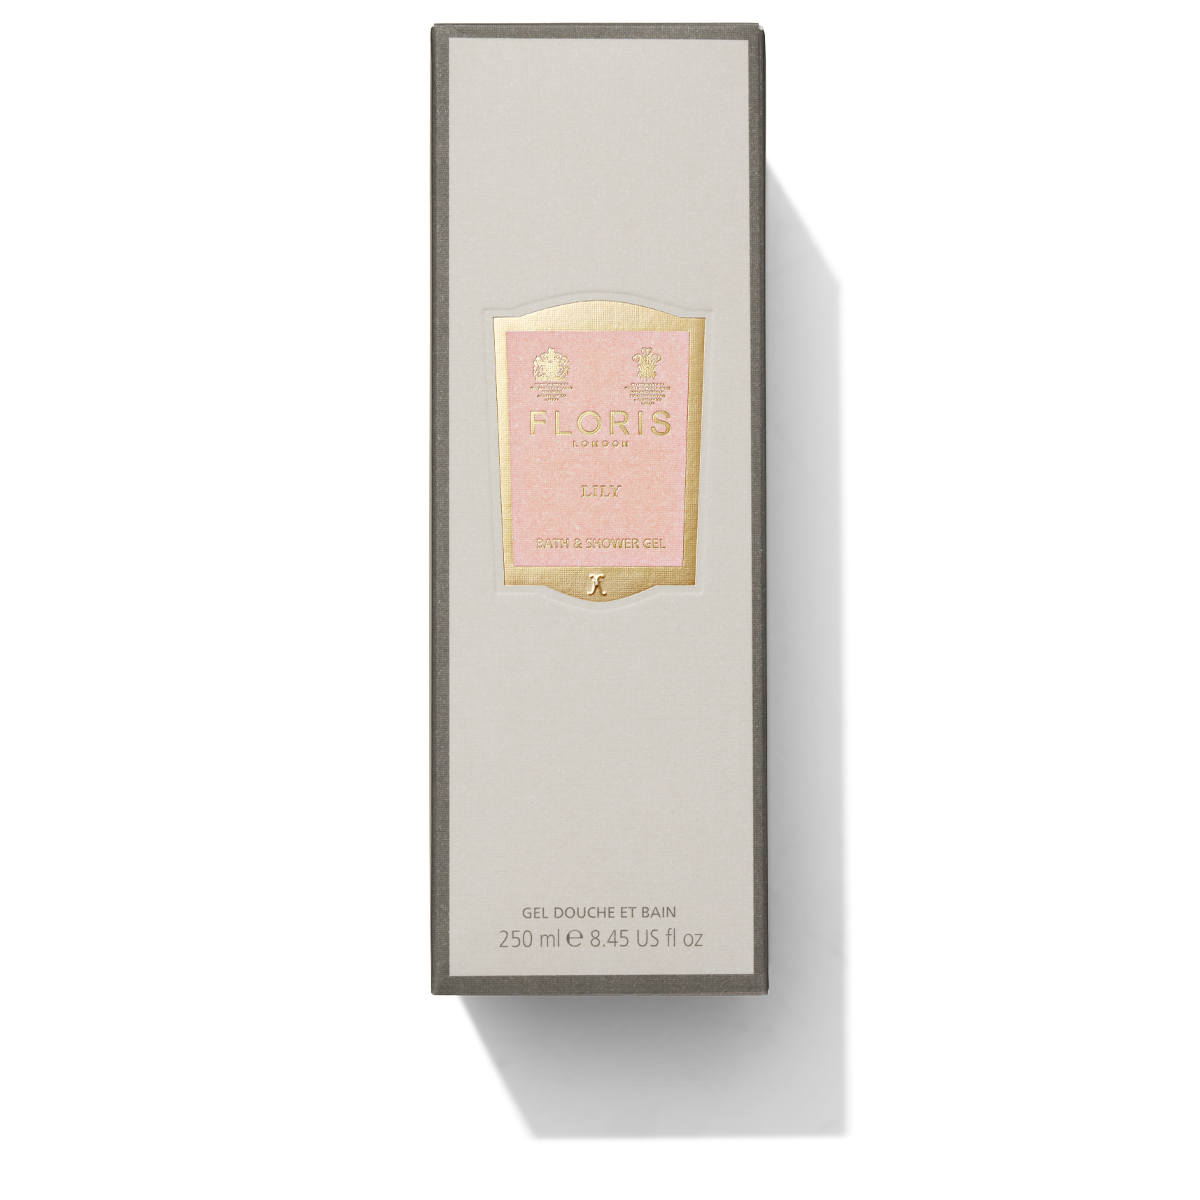 Grey box with light pink and gold label containing Lily Bath & Shower Gel  